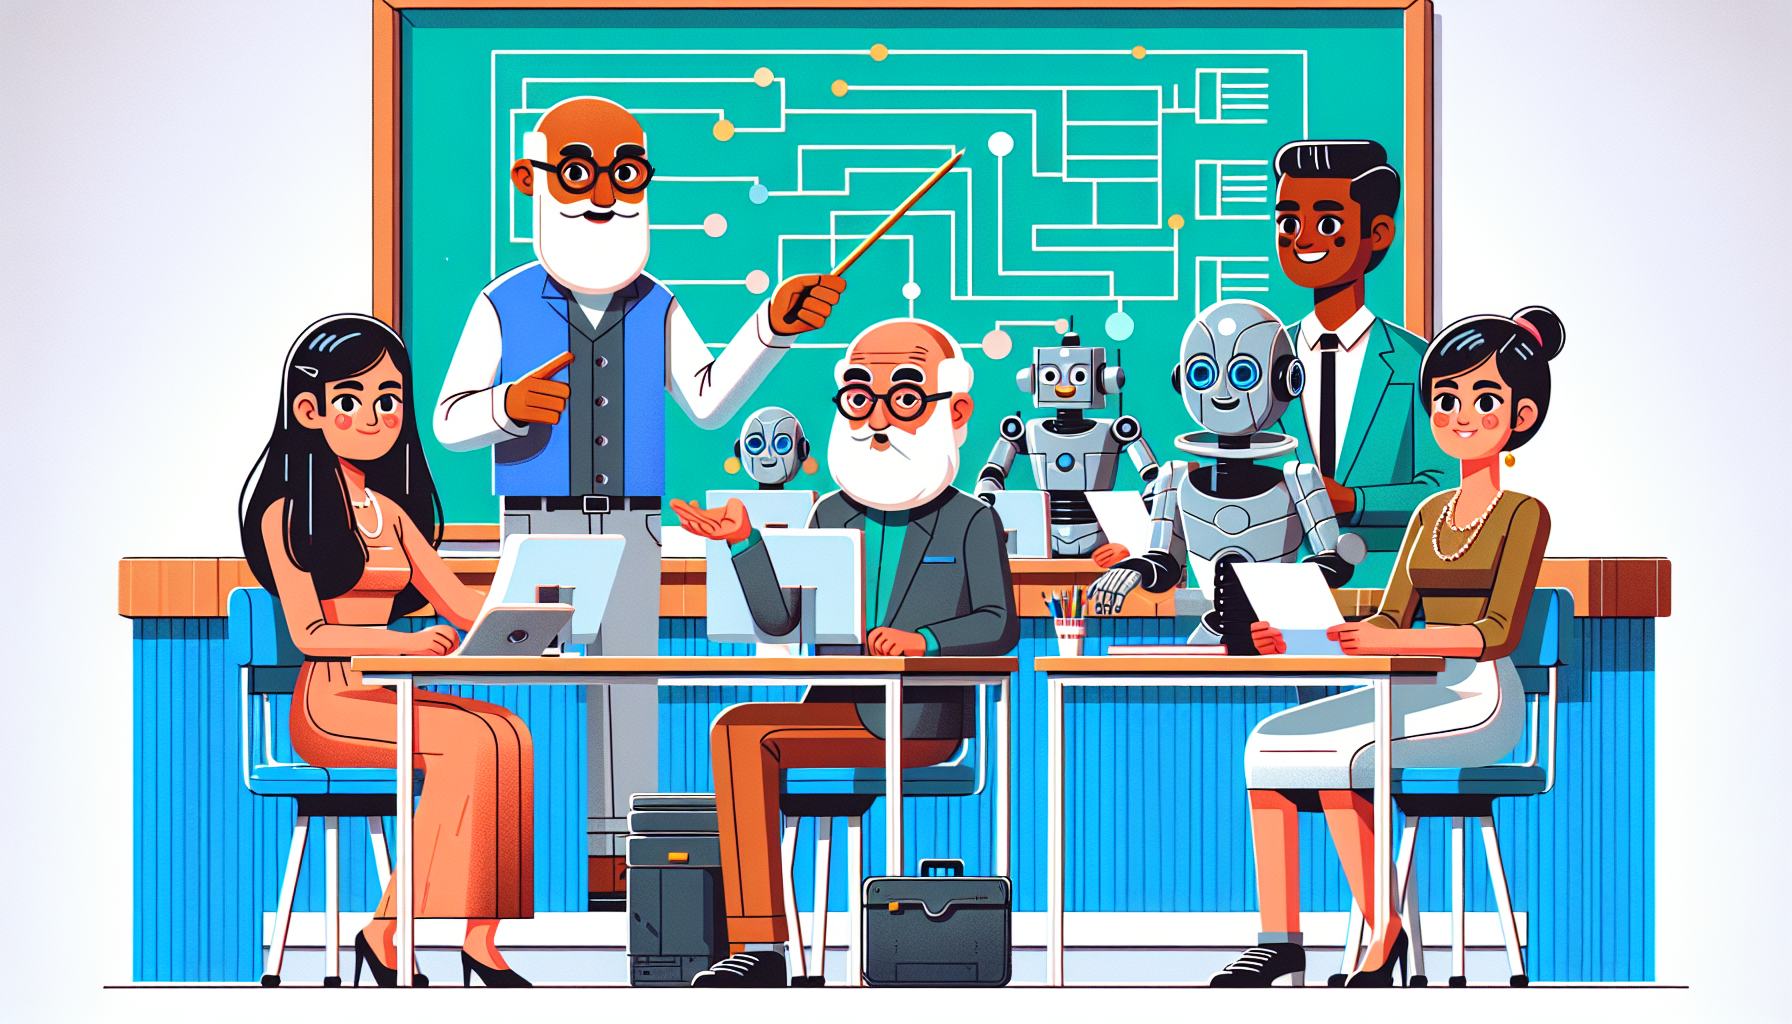 An artistically drawn classroom setting with a diverse group of animated characters, including a young woman with a clipboard, an elderly man with glasses, and a robot, all sitting at desks with penci